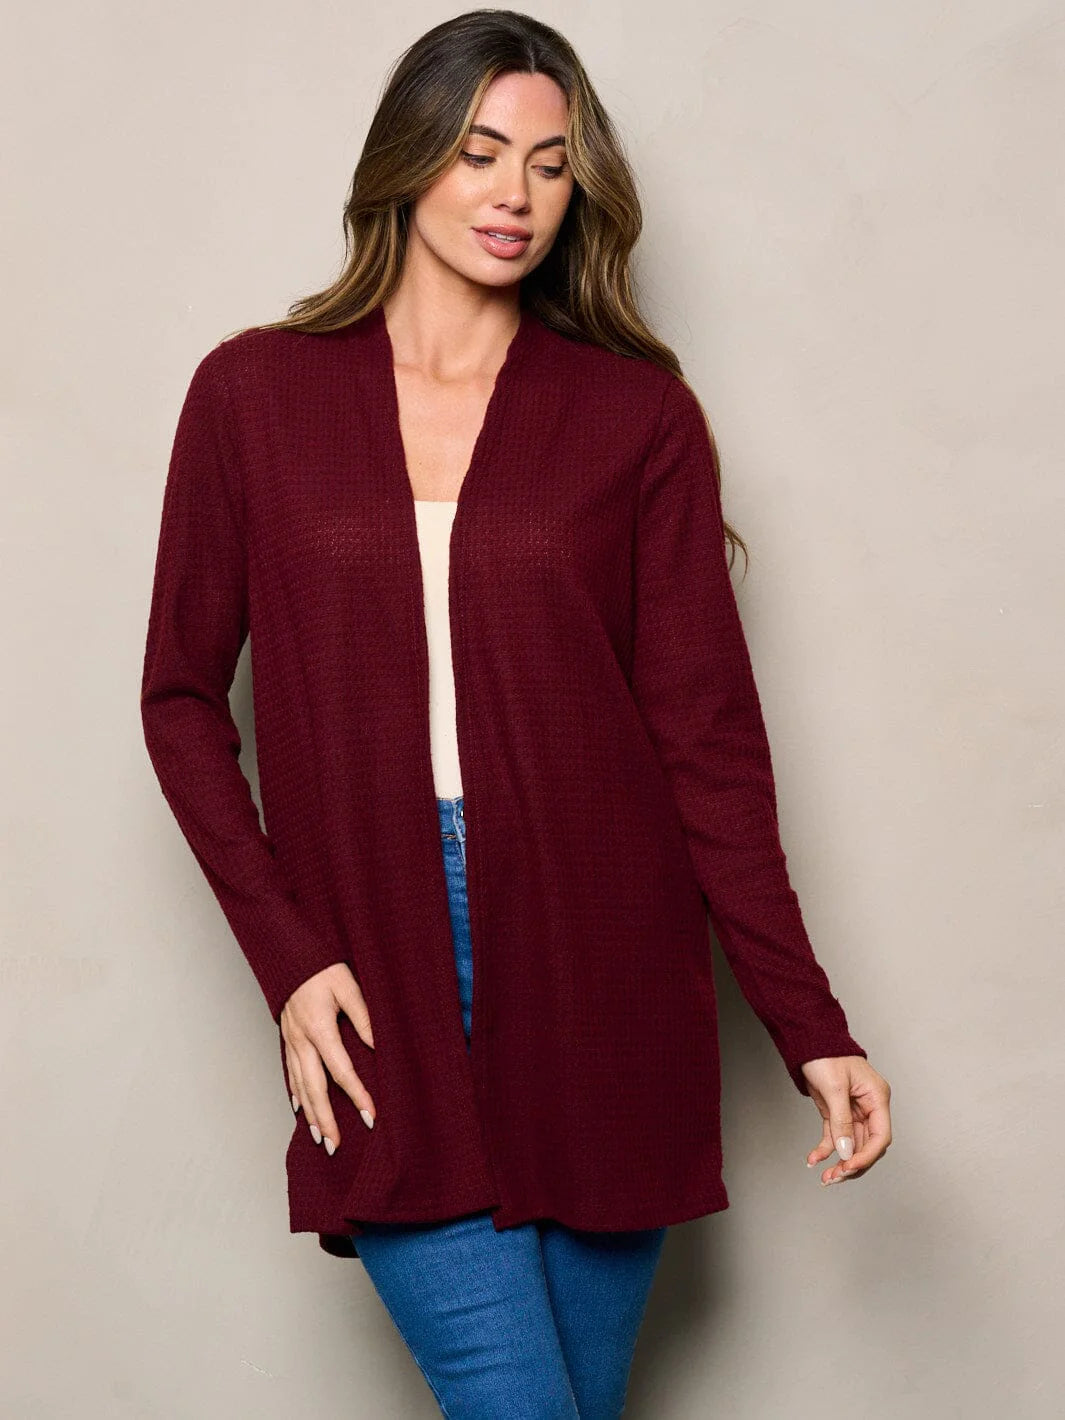 Elbow Patched Waffle Cardigan in Burgundy front view.